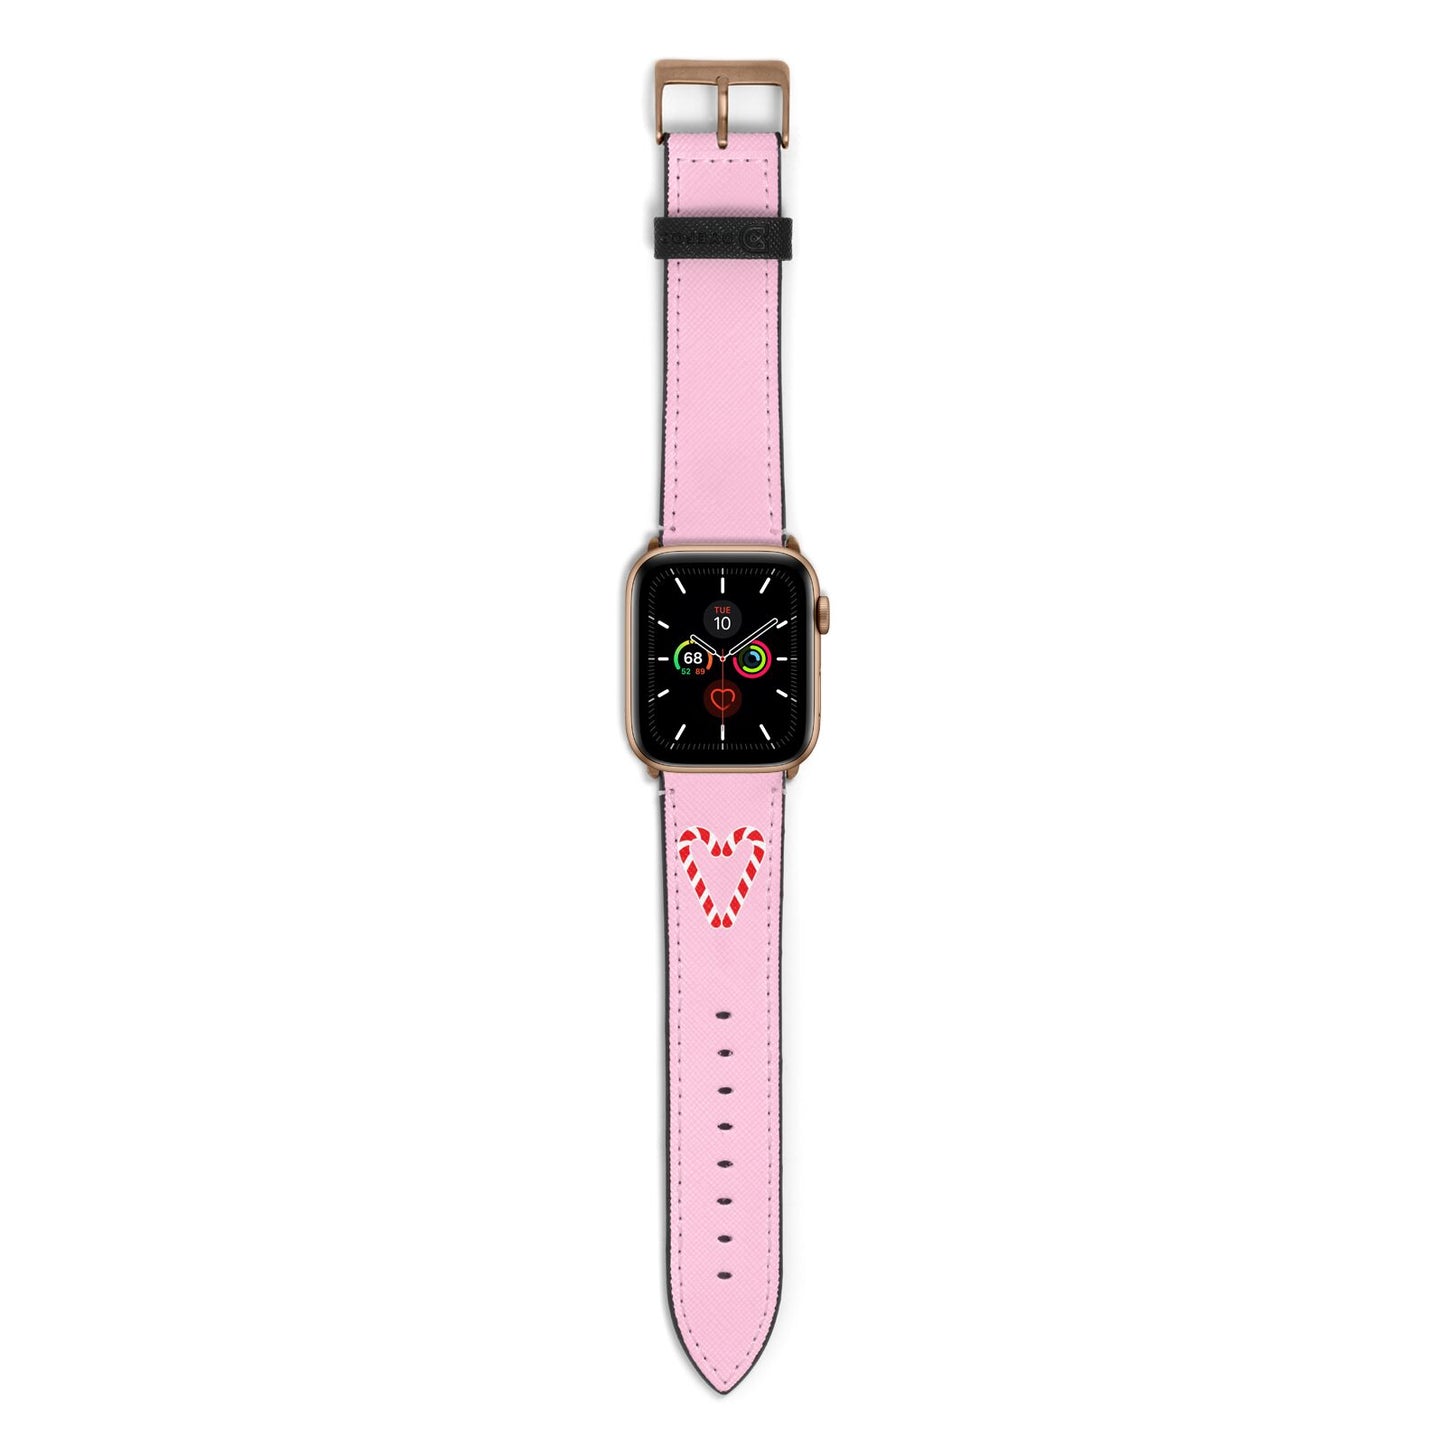 Candy Cane Heart Apple Watch Strap with Gold Hardware